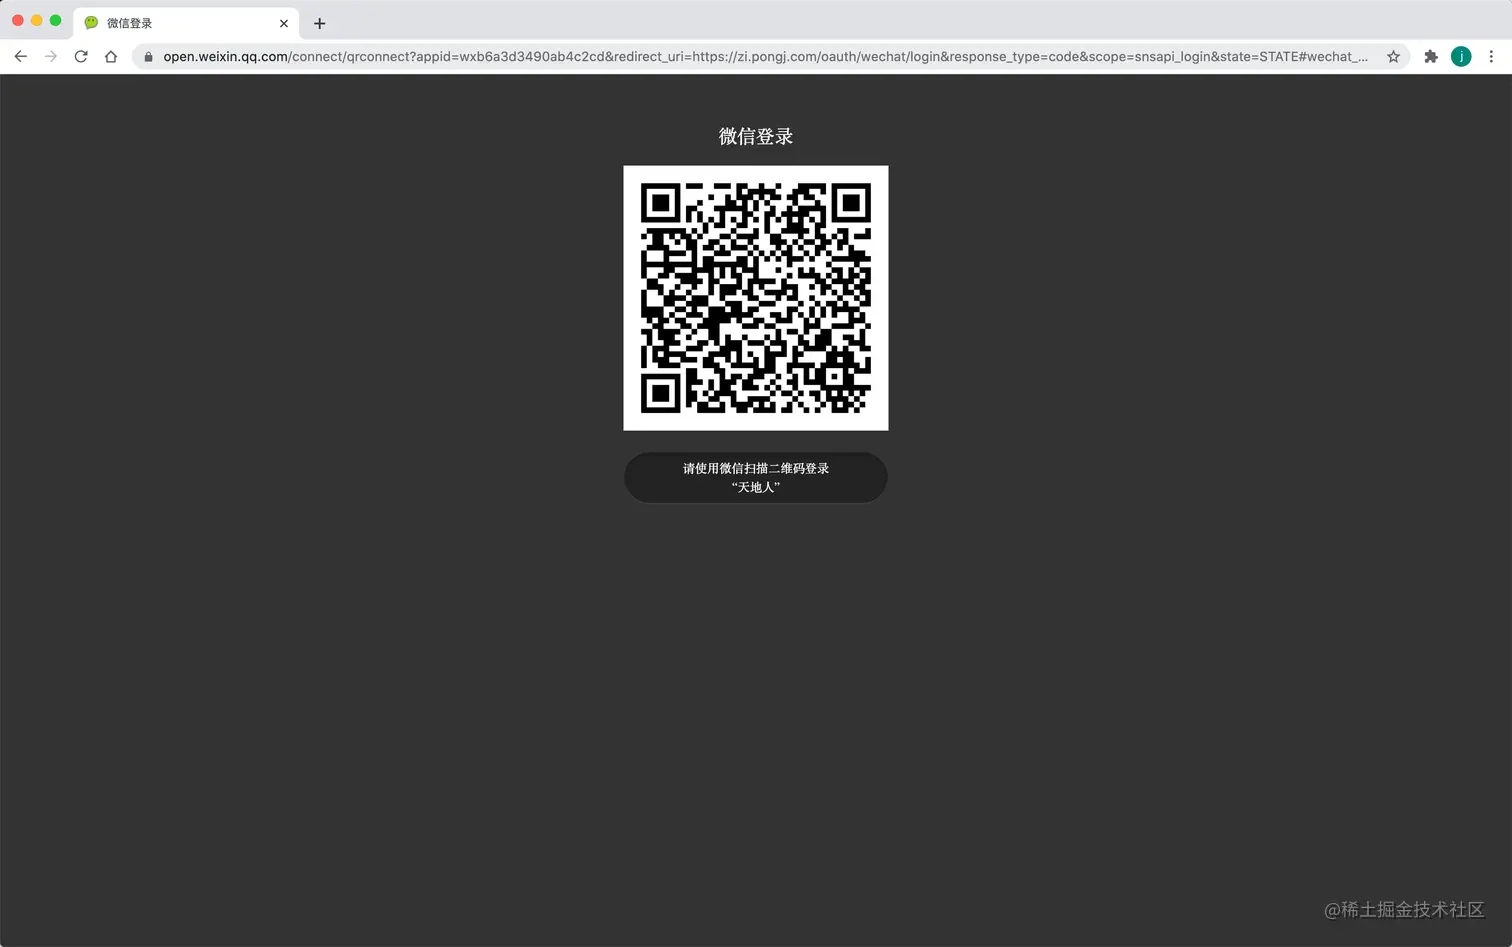 request-wechat-user-to-scan